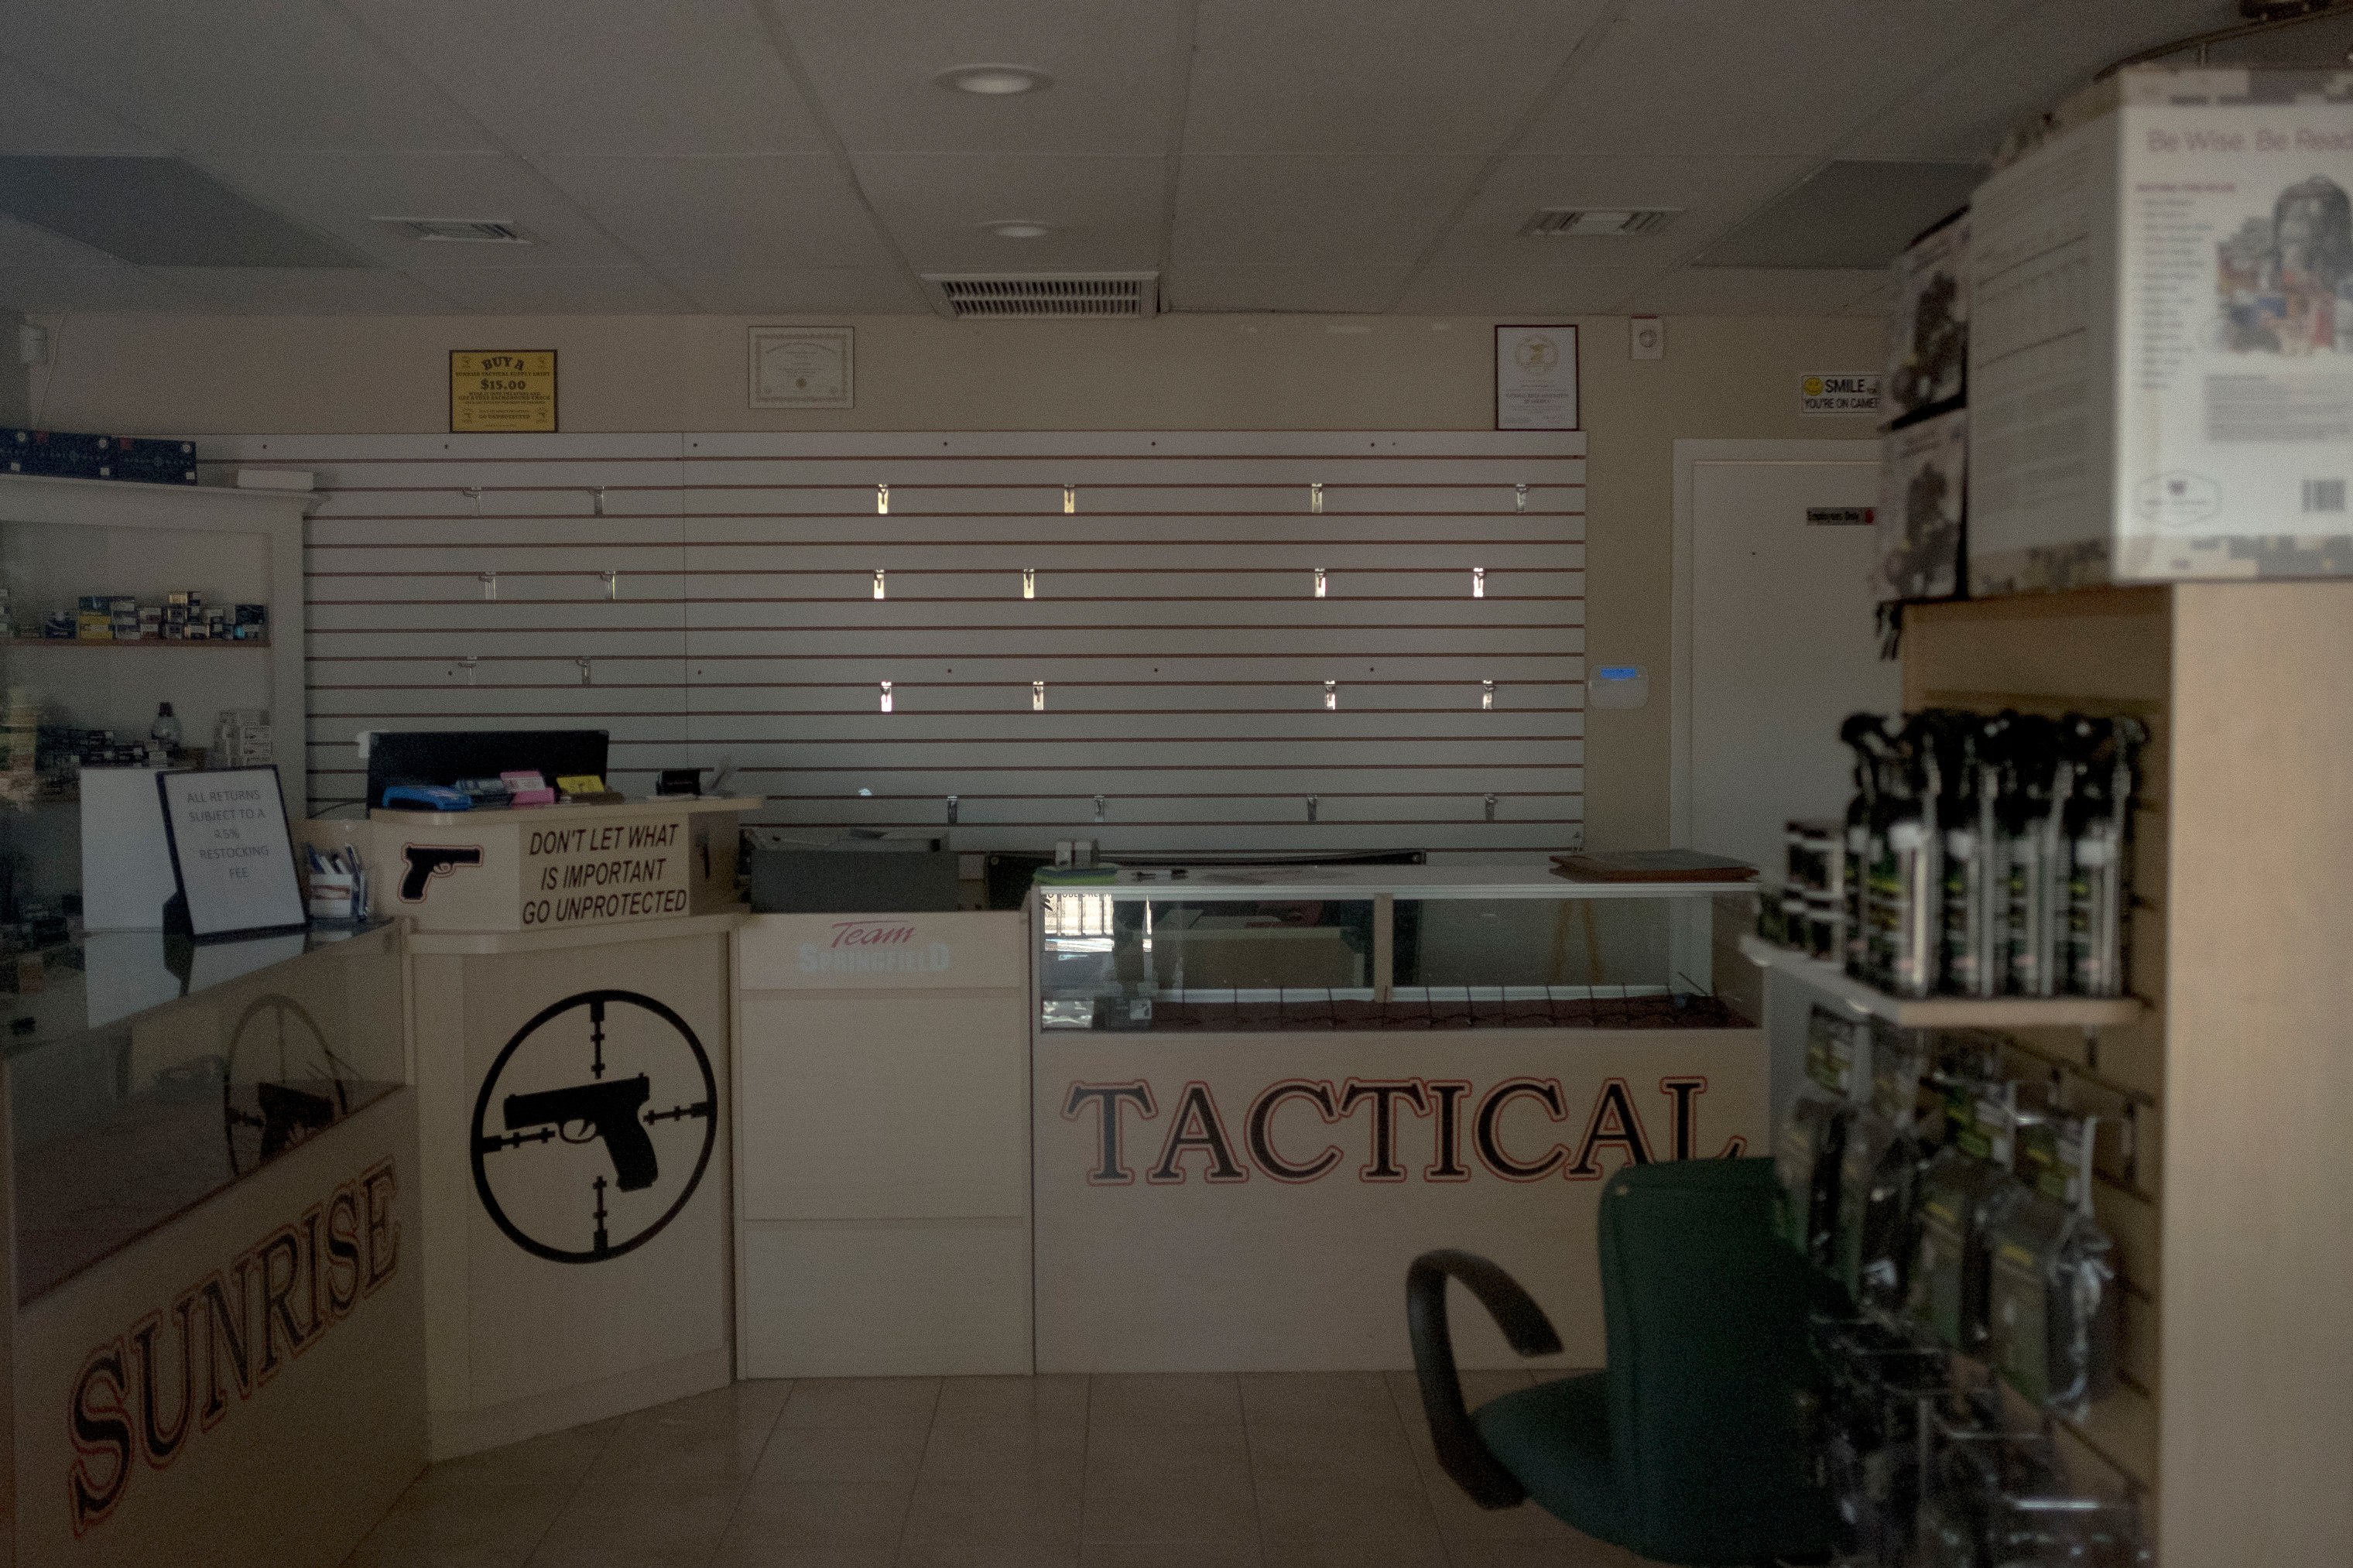 Sunrise Tactical Supply in Coral Springs, where accused shooter Nikolas Cruz bought his weapon. Just down the street from the high school, the store lay mostly empty and was closed indefinitely. A sign at the window stated “God Bless Our Troops…Especially Our Snipers.” (Gabriella Demczuk for TIME)